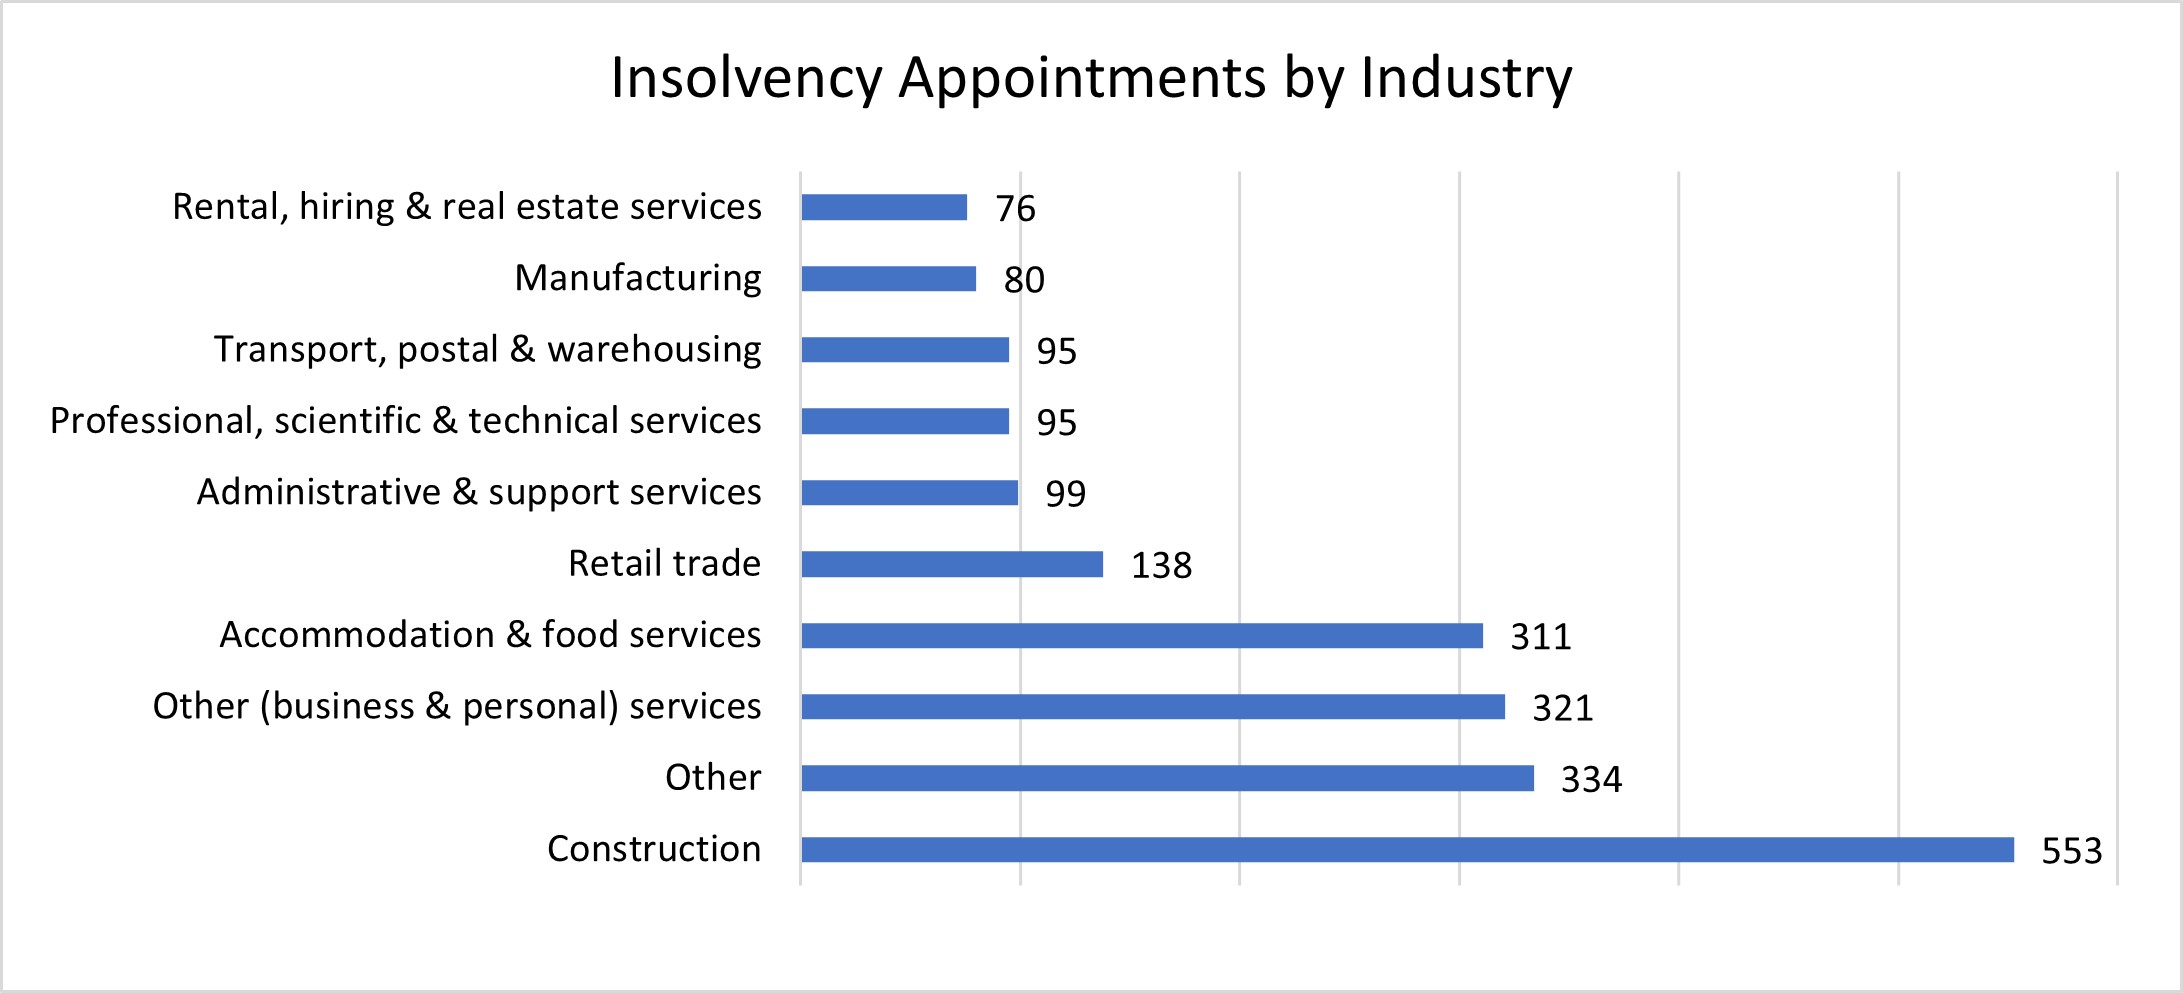 Insolvency appointments by industry